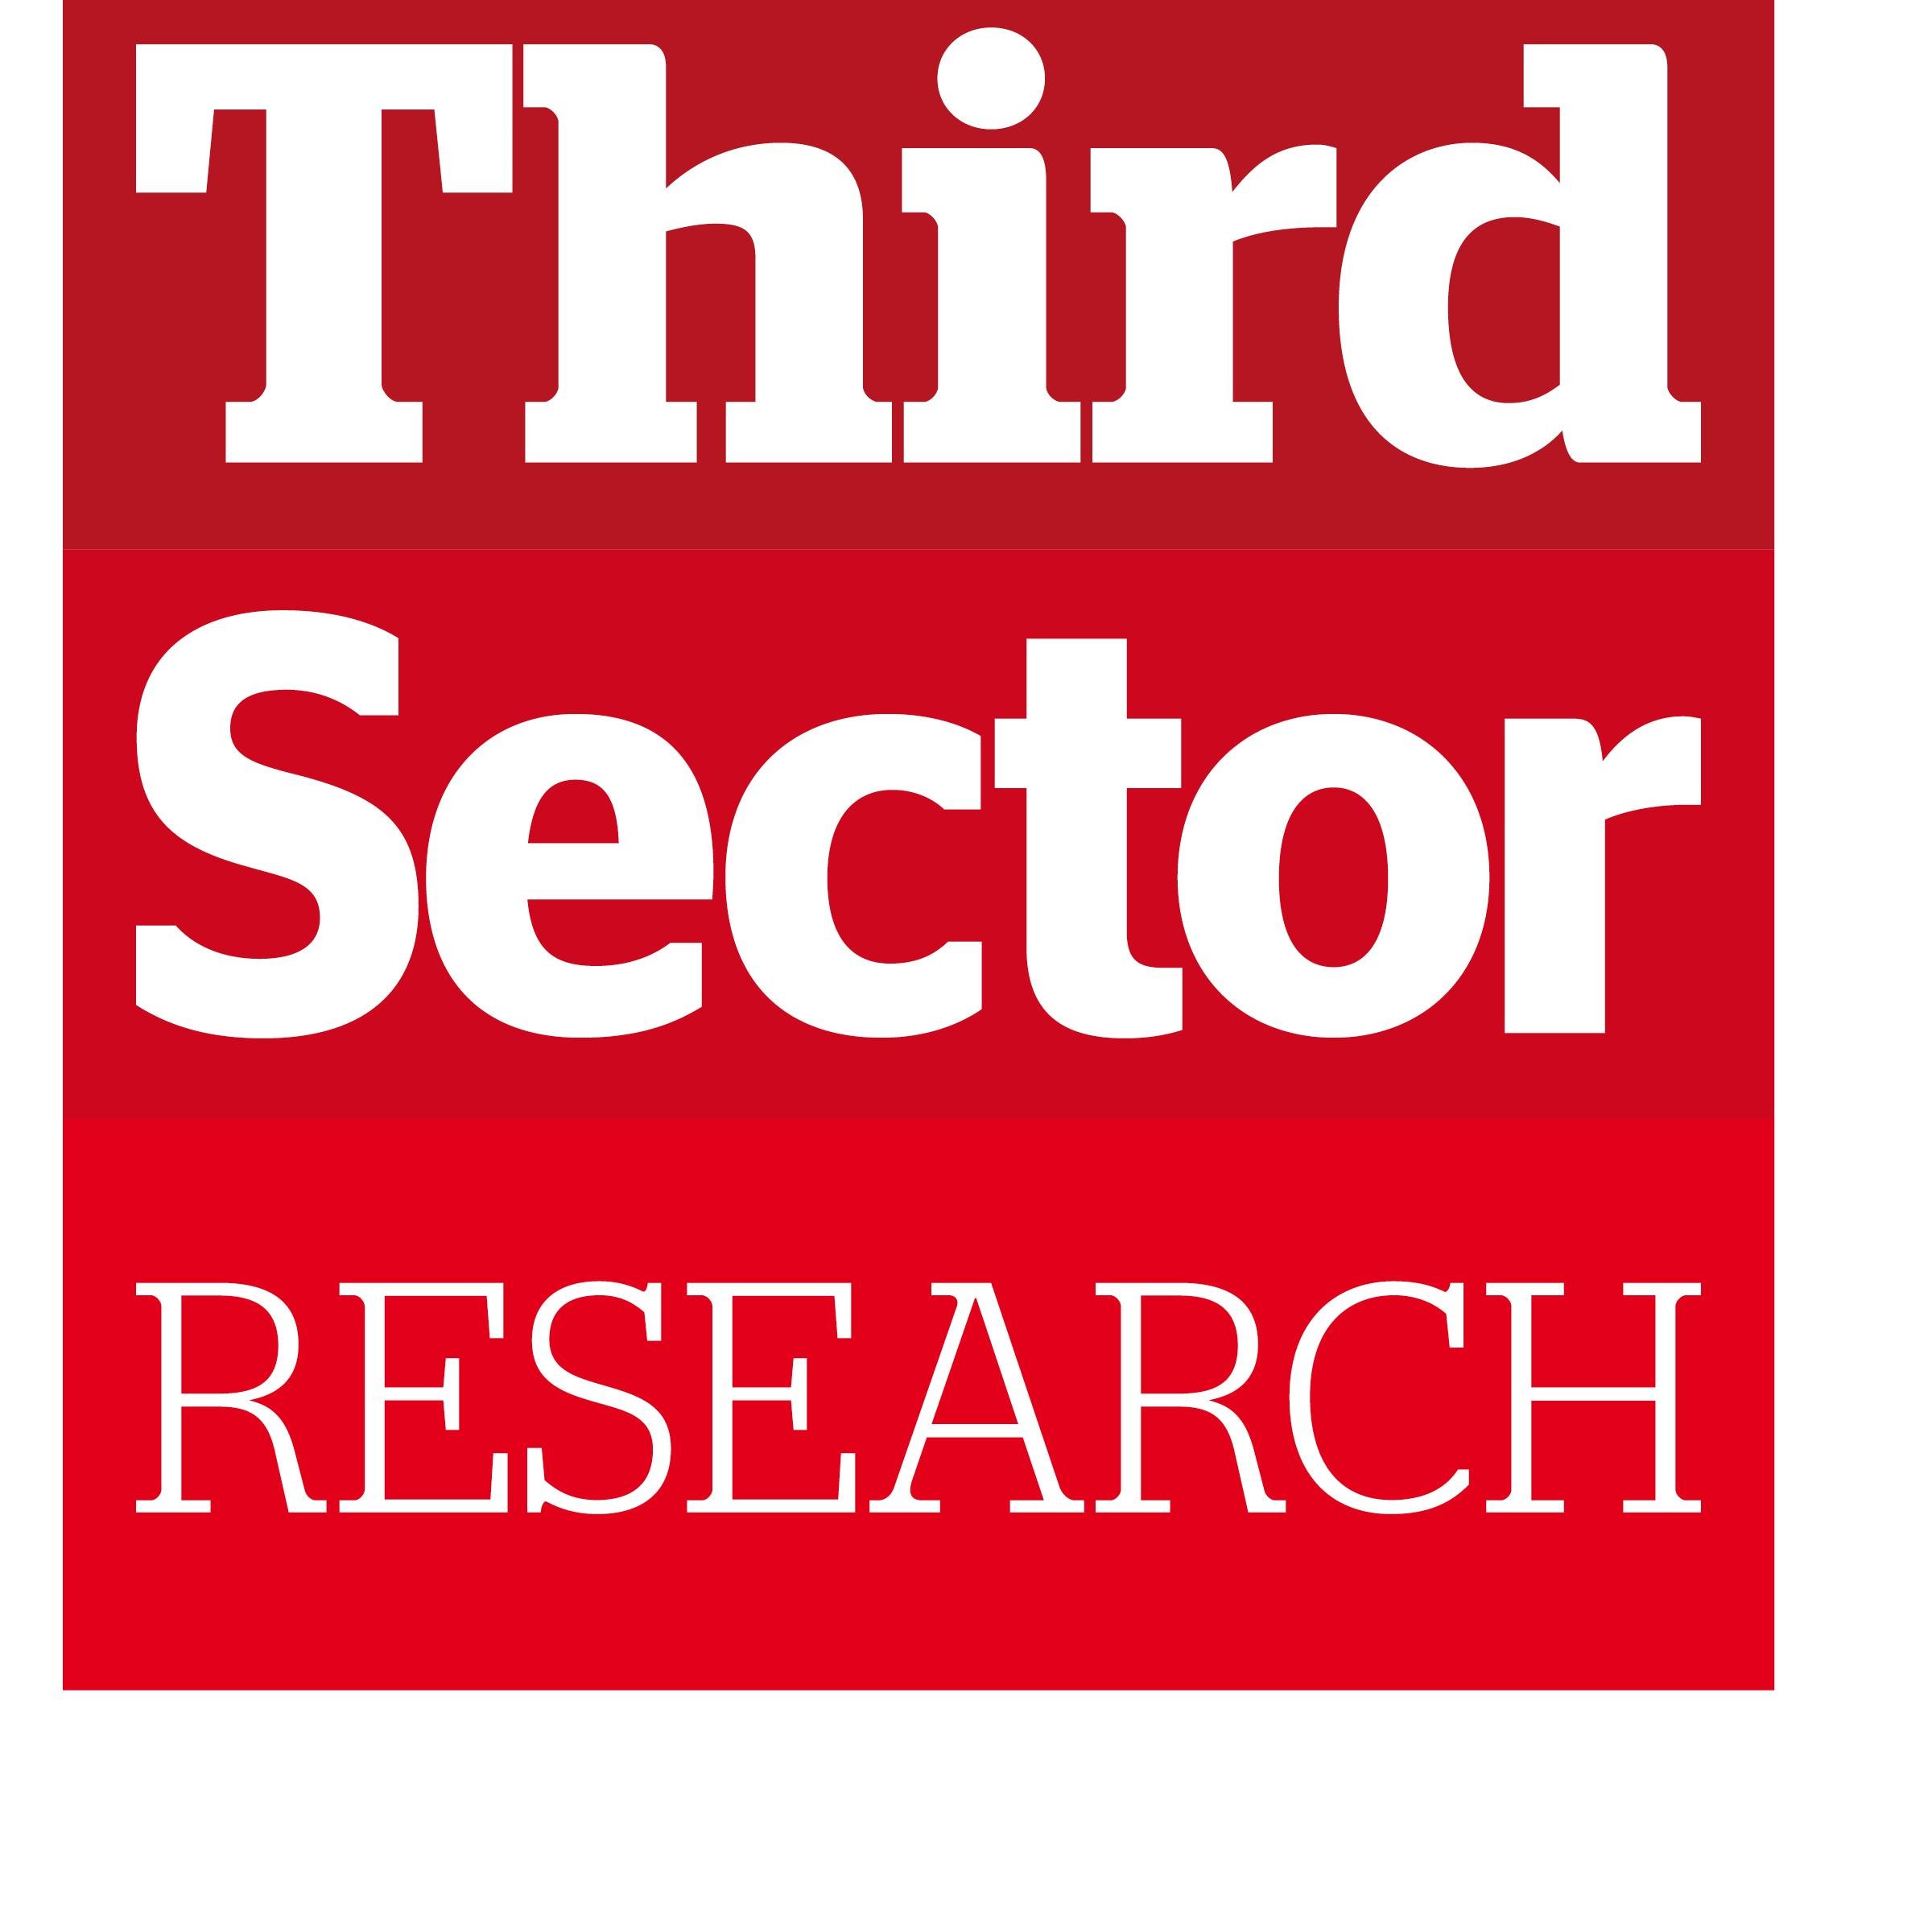 Third Sector Research is dedicated to producing high-quality and affordable research reports designed to aid the work of voluntary sector organisations.